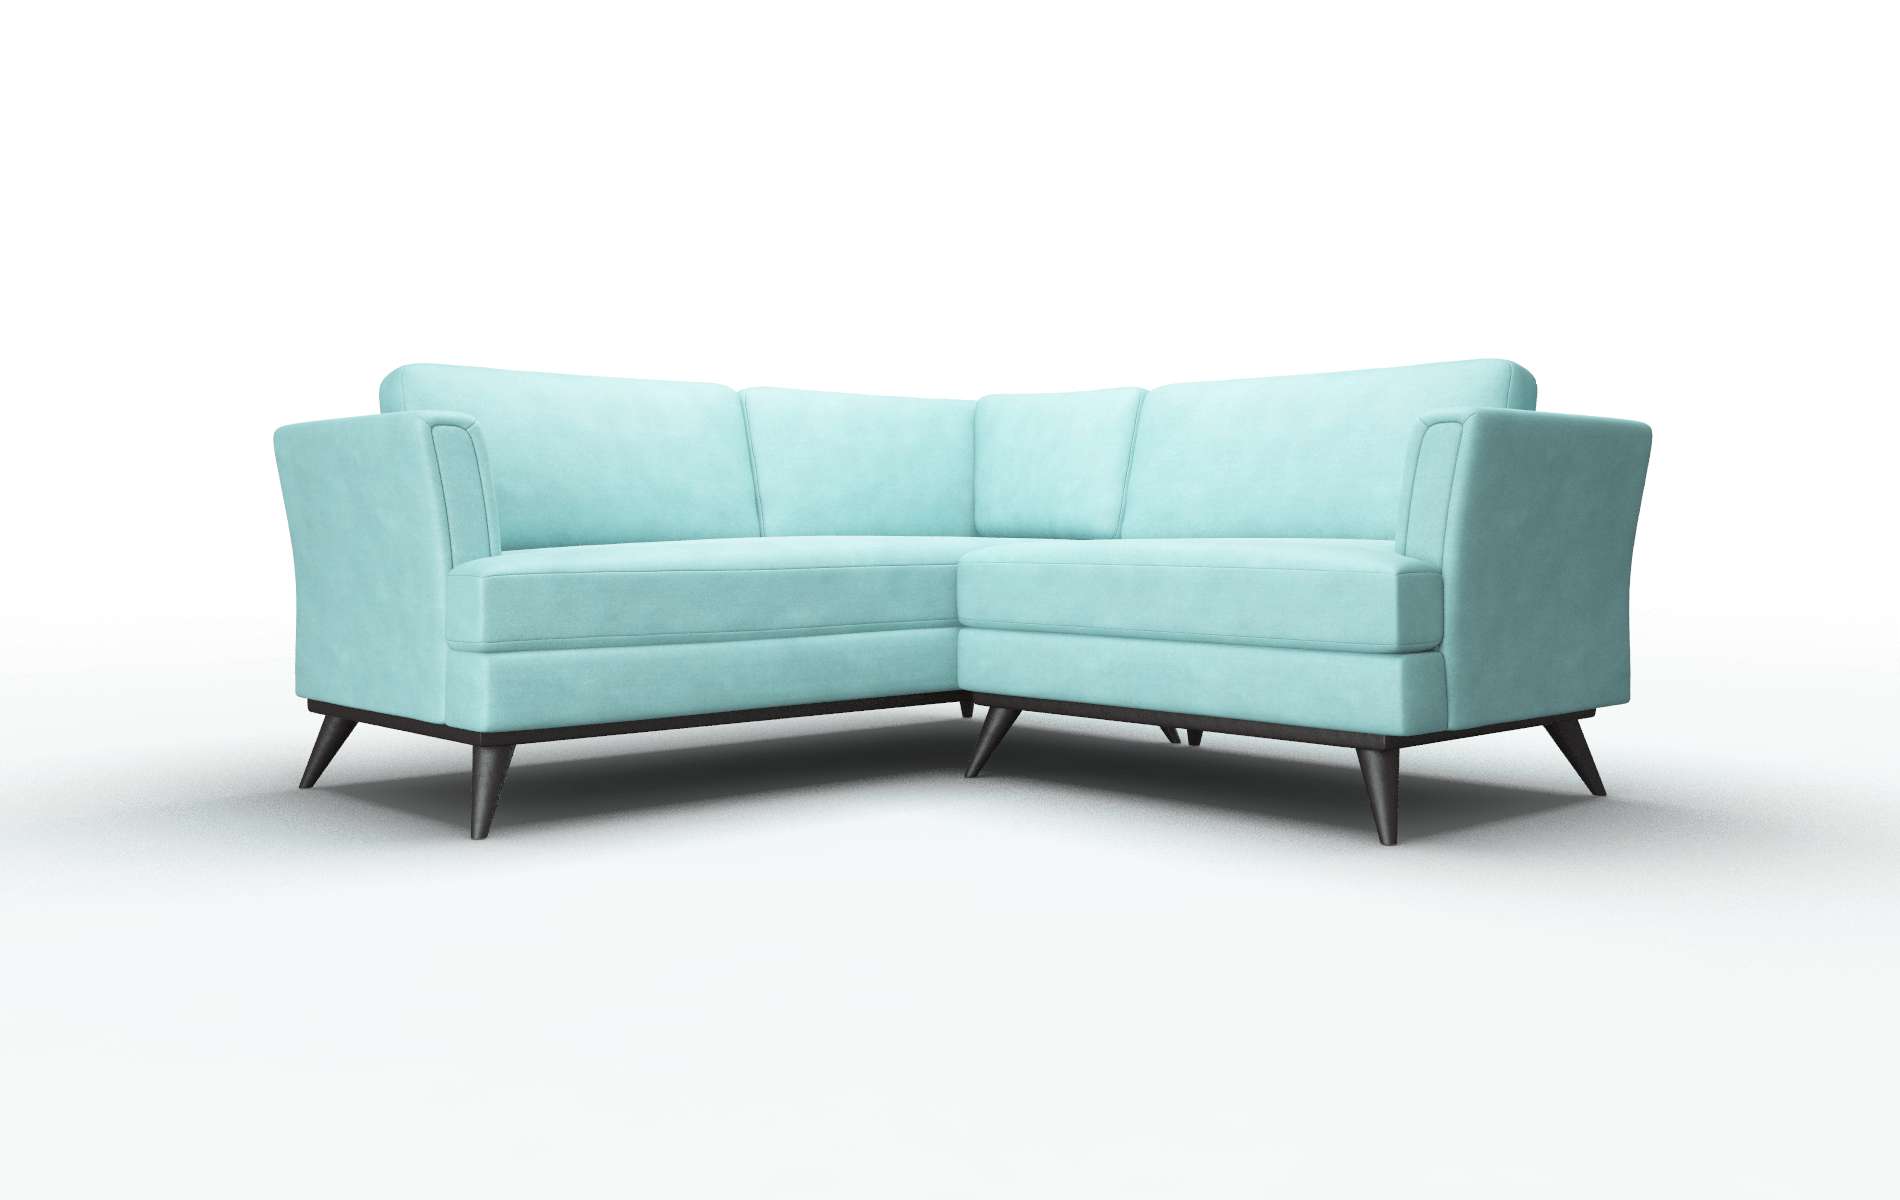 Antalya Curious Turquoise Sectional espresso legs 1